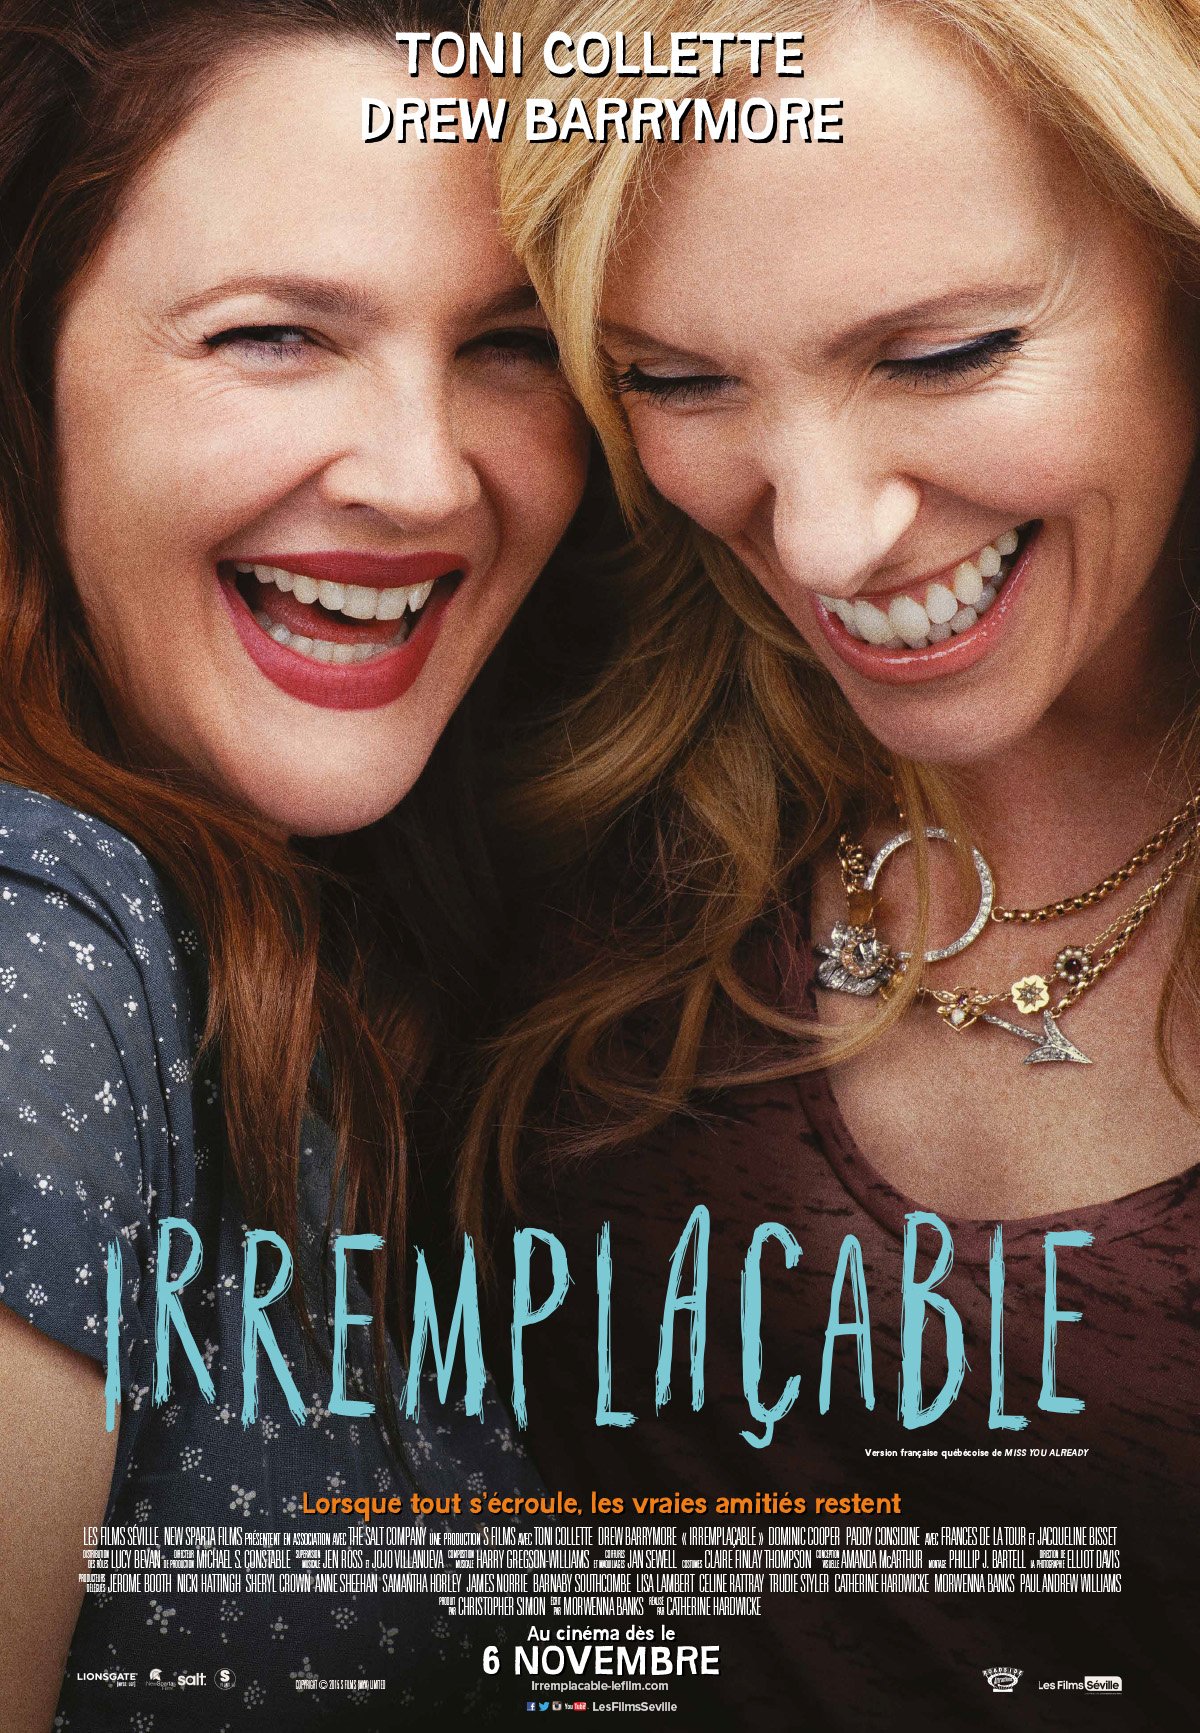 Poster of the movie Irremplaçable